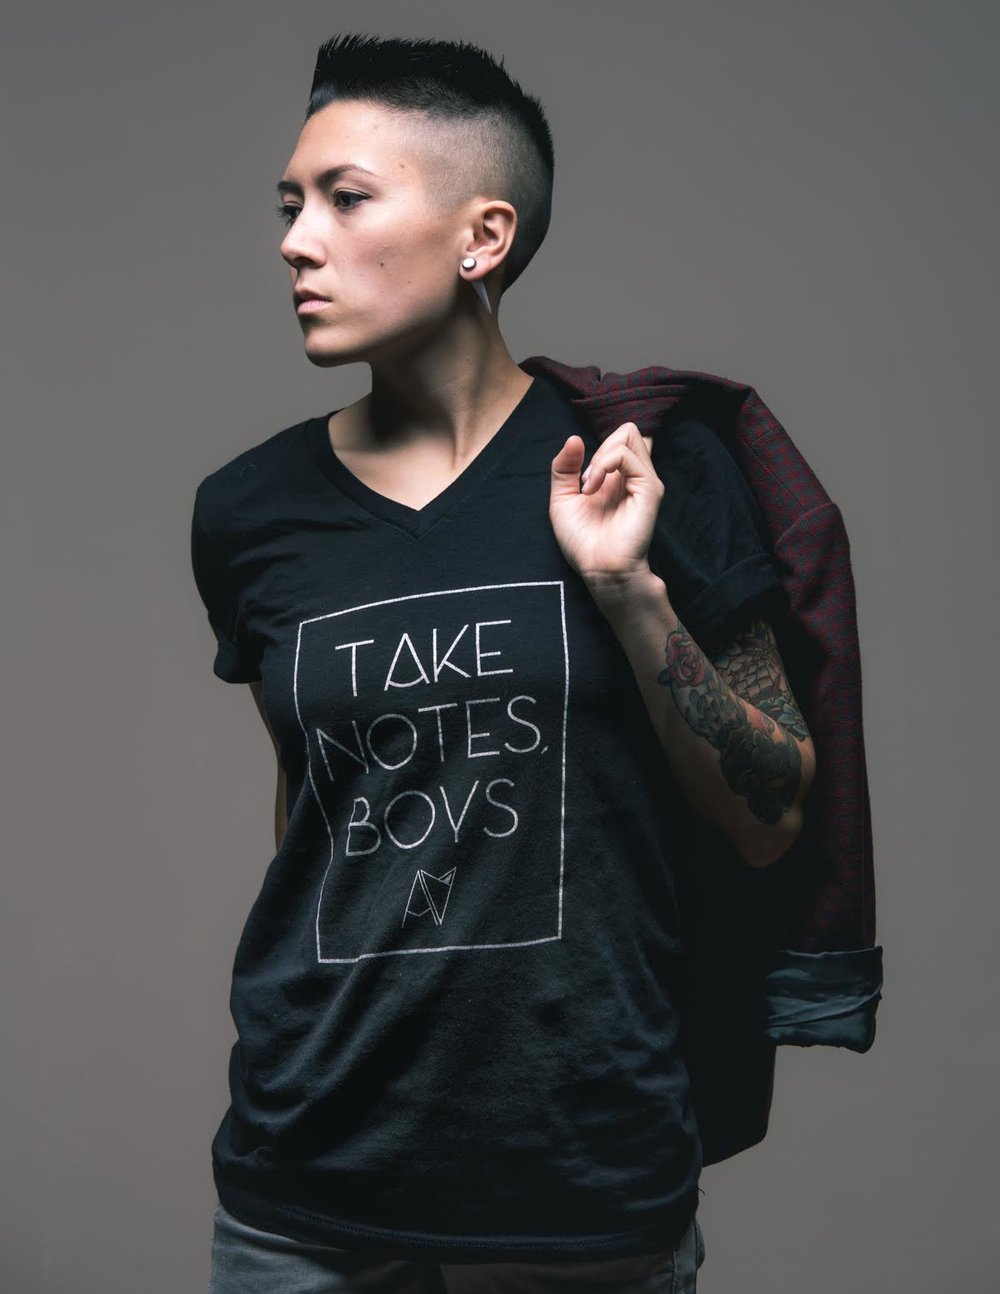 Model wearing black v-neck 'take notes boys" t-shirt by Androgynous Fox.